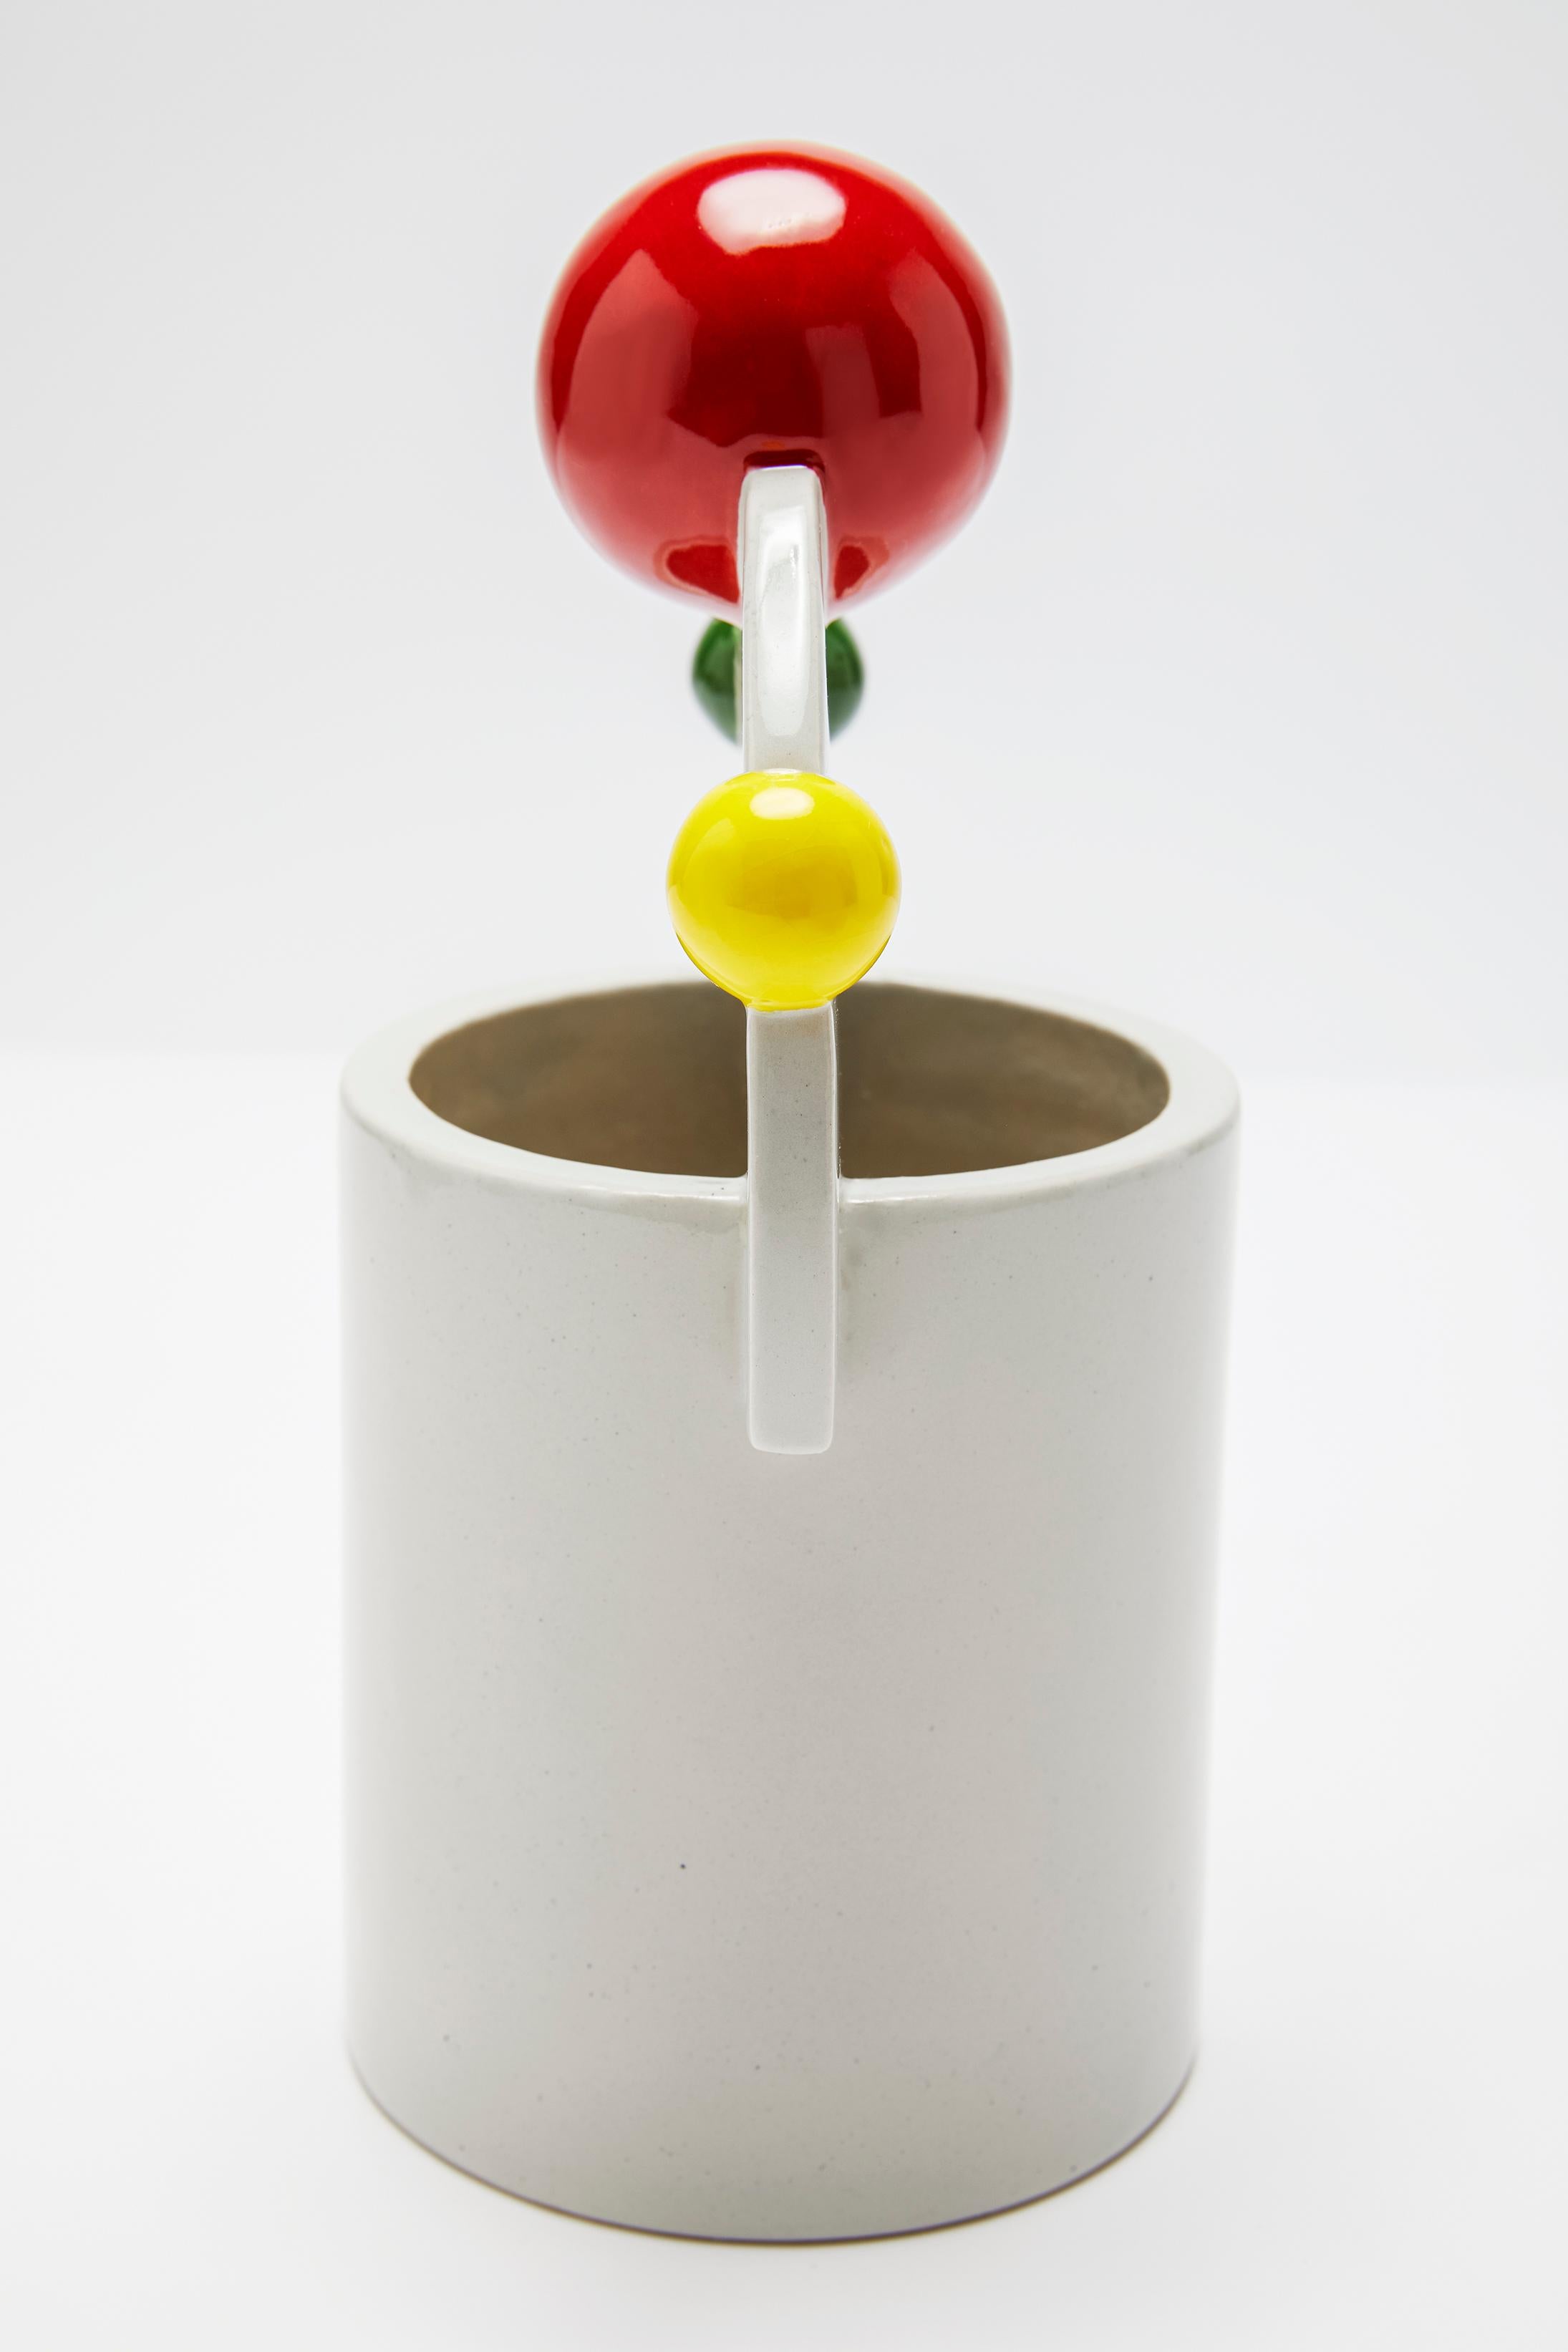 Space M is a collection of glazed ceramic vases made up of five elements. The collection is inspired by Mirò's painting 